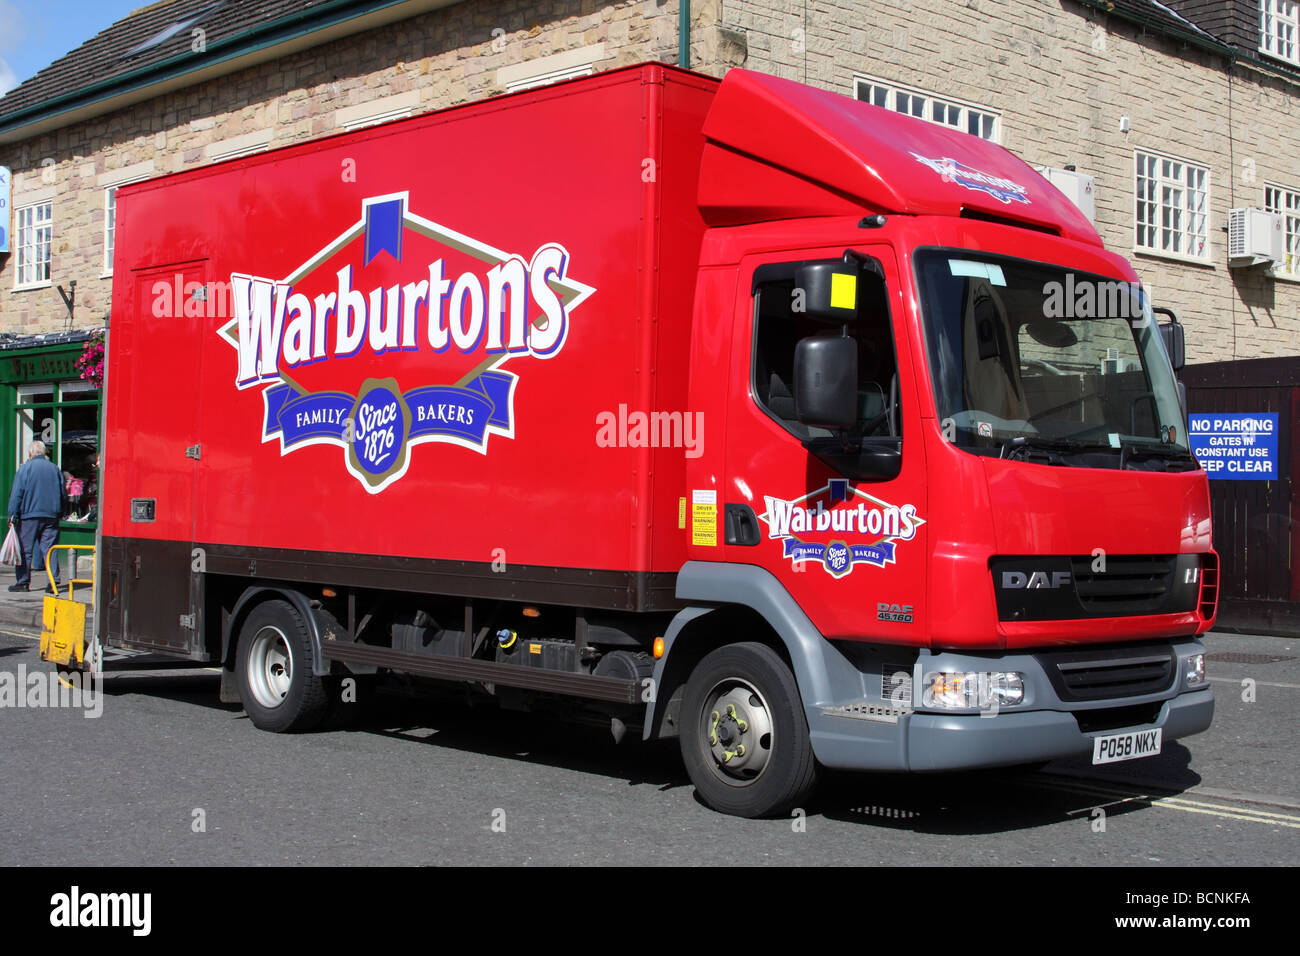 A Warburtons delivery lorry on a U.K. street Stock Photo, Royalty Free Image: 25062558  Alamy